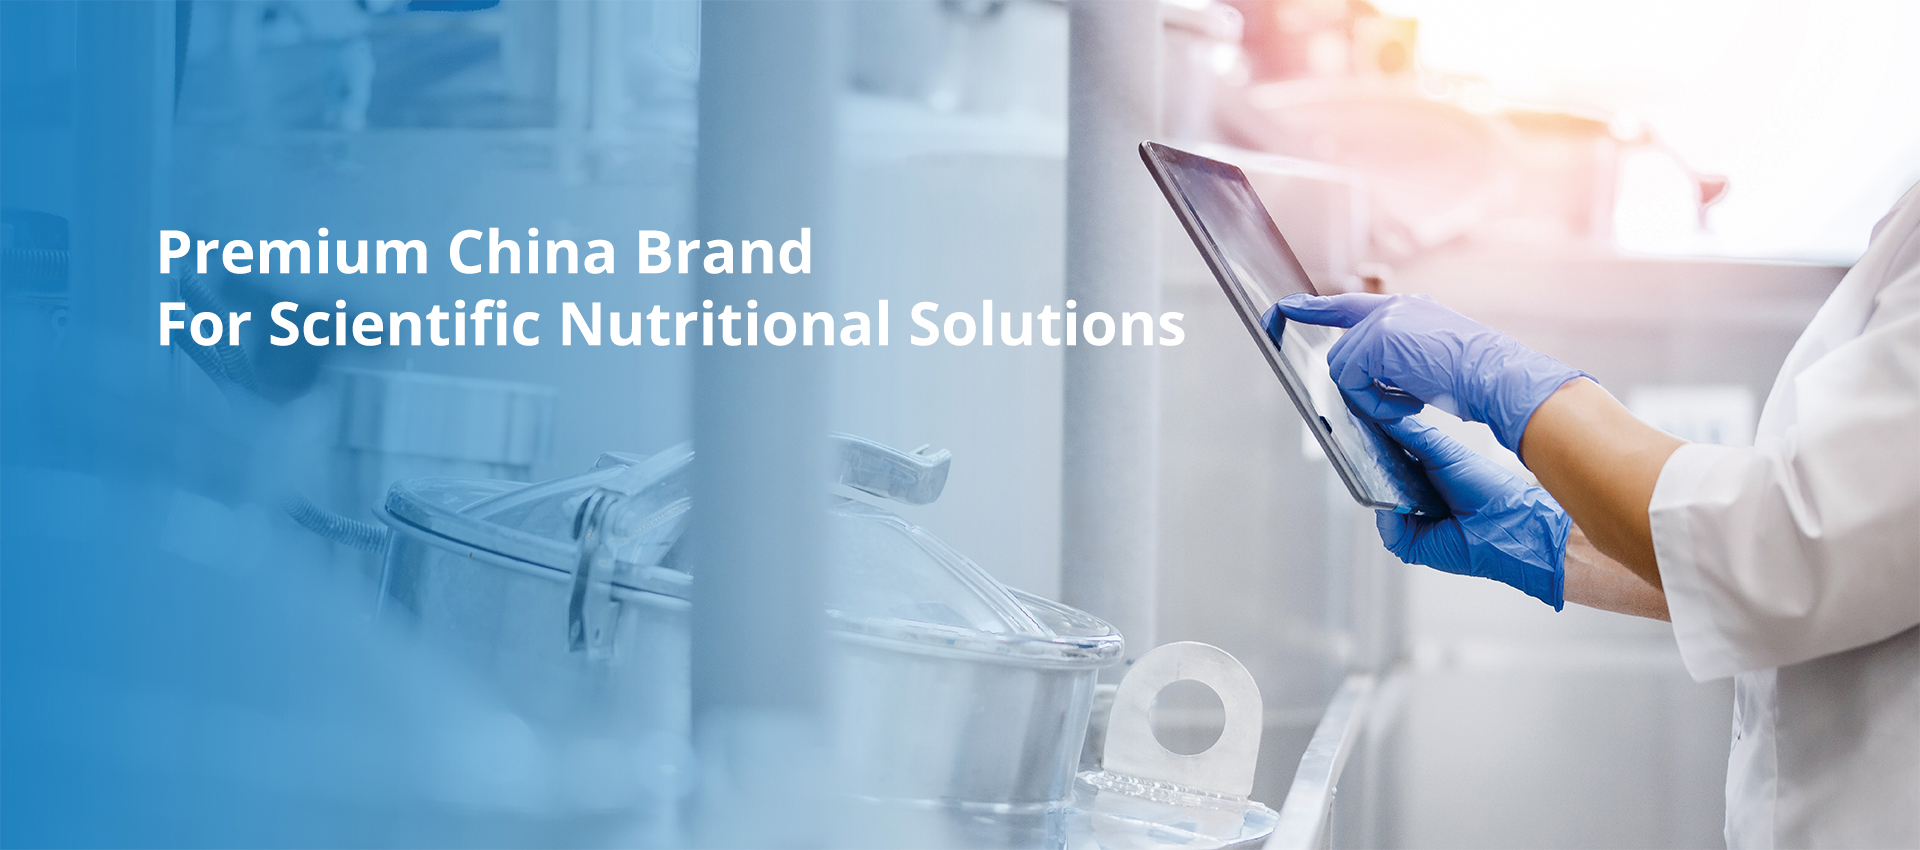 Premium China Brand For Scientific Nutritional Solutions